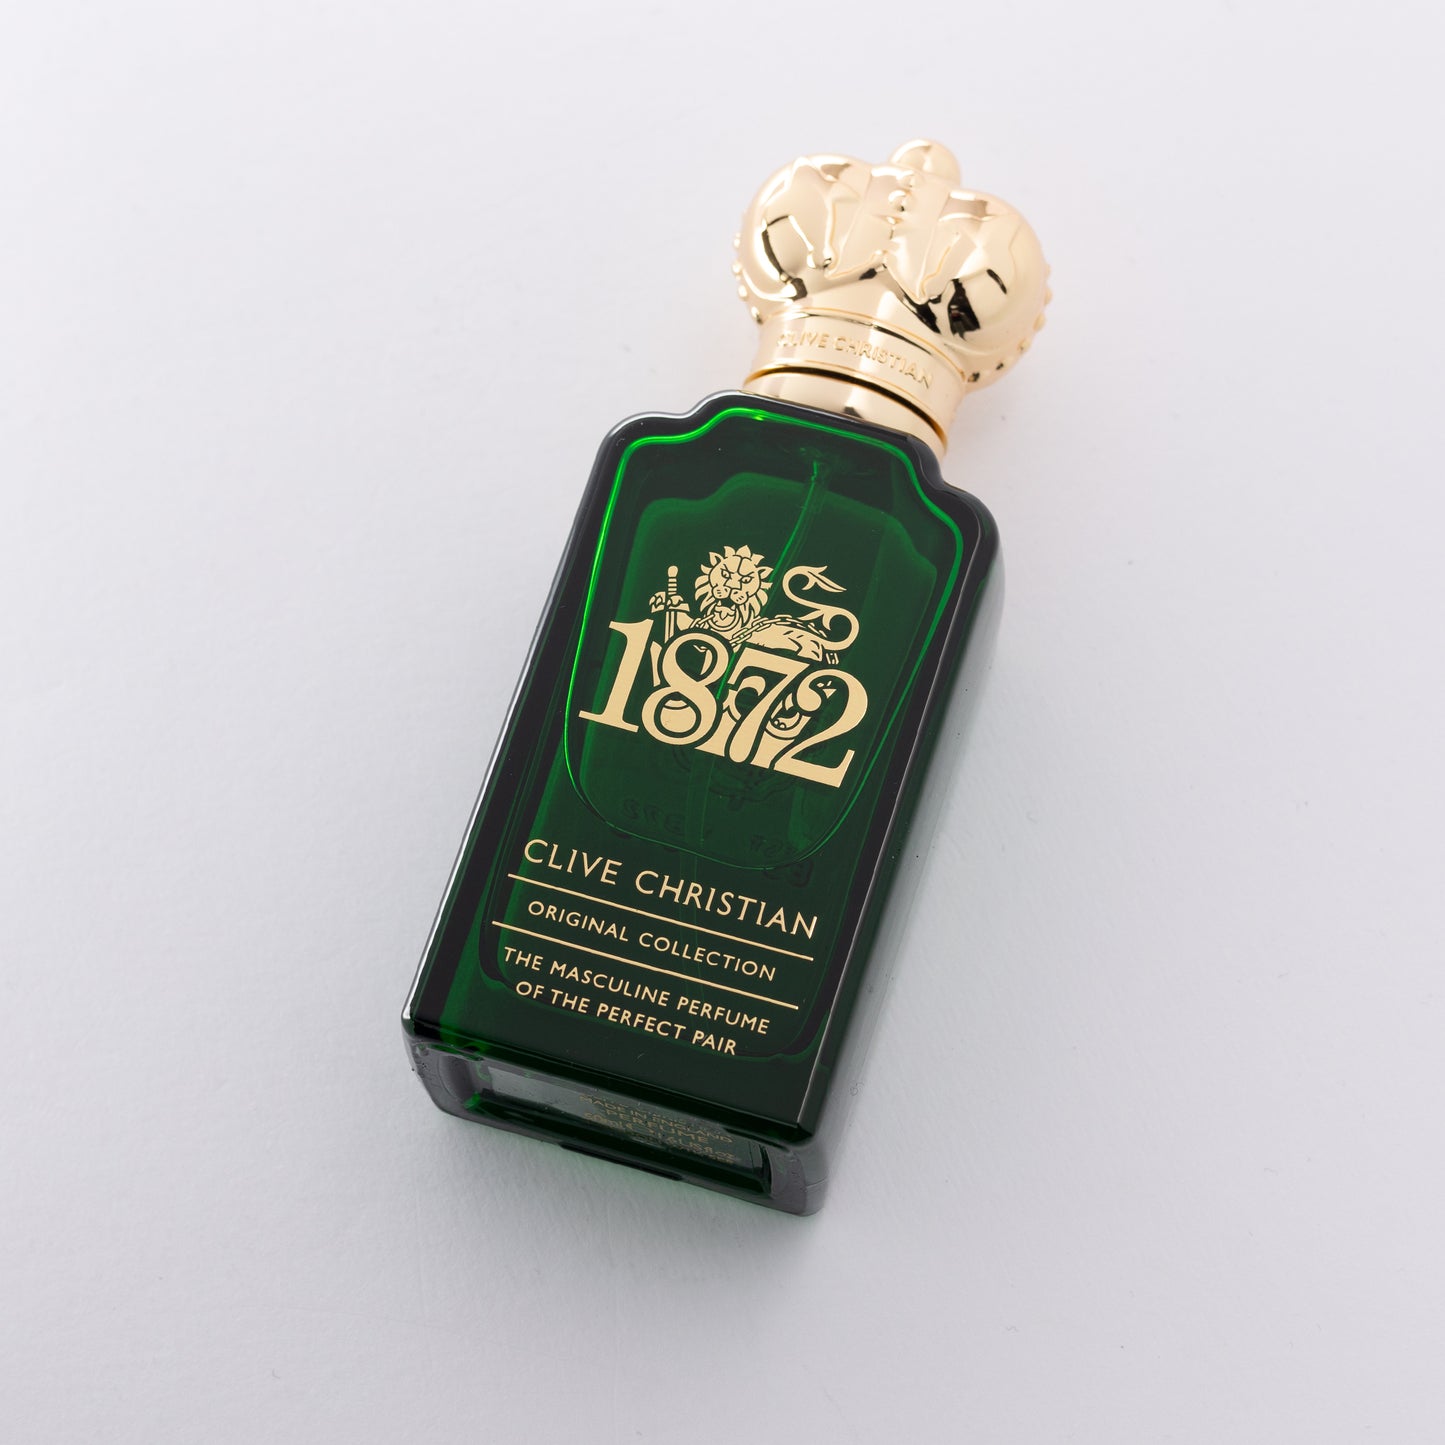 1872 - The Masculine Perfume of the Perfect Pair